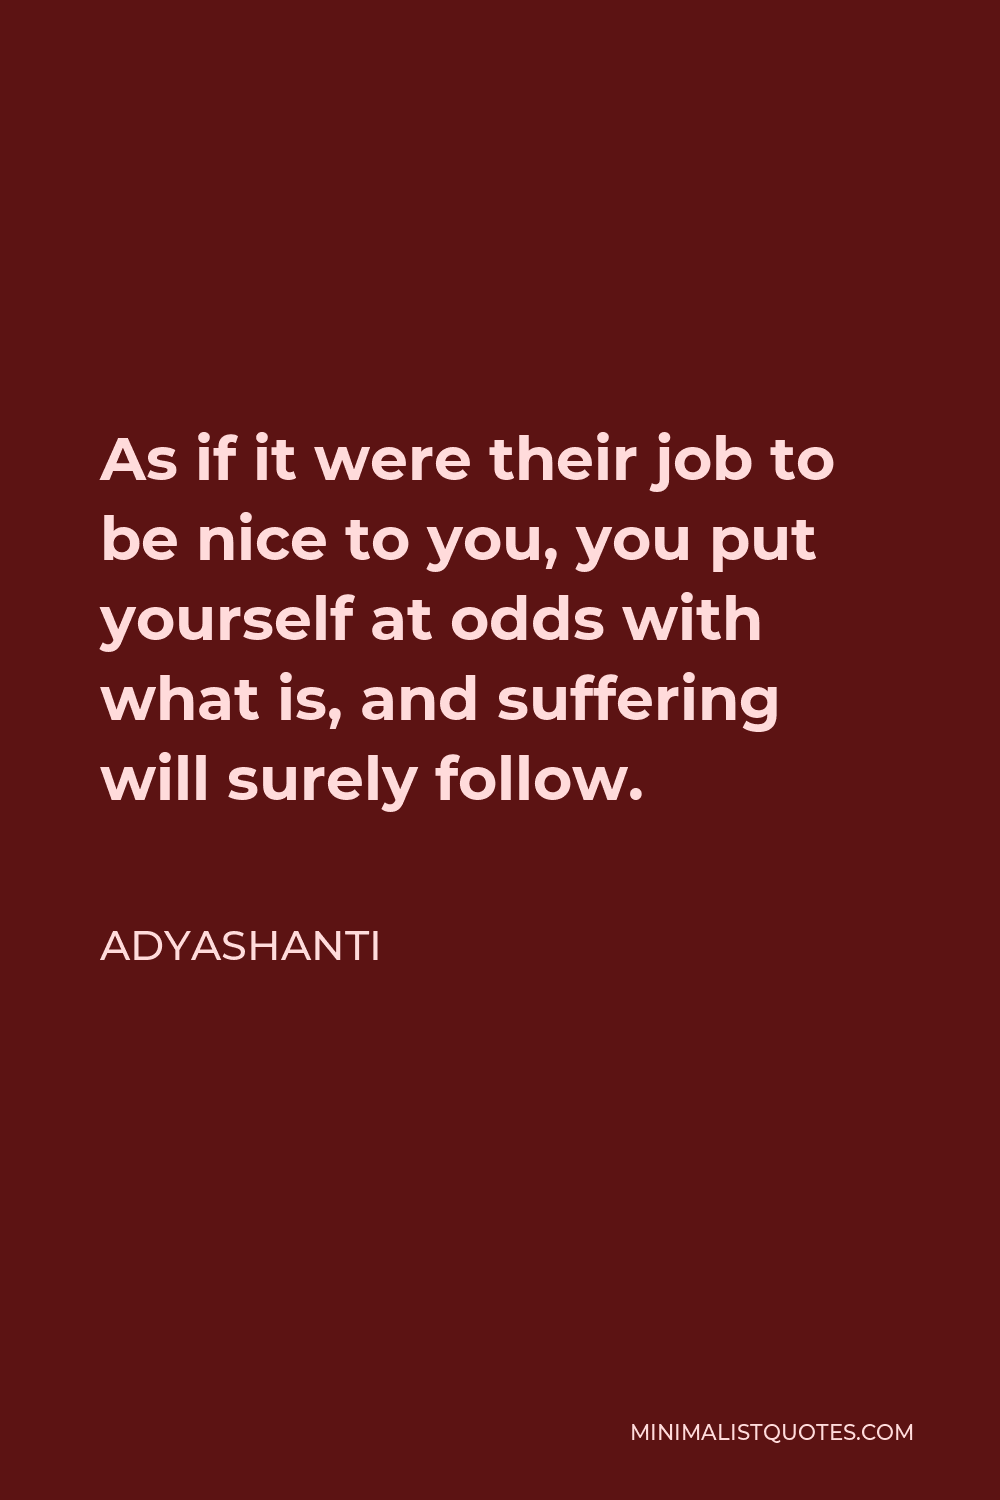 Adyashanti Quote - As if it were their job to be nice to you, you put yourself at odds with what is, and suffering will surely follow.